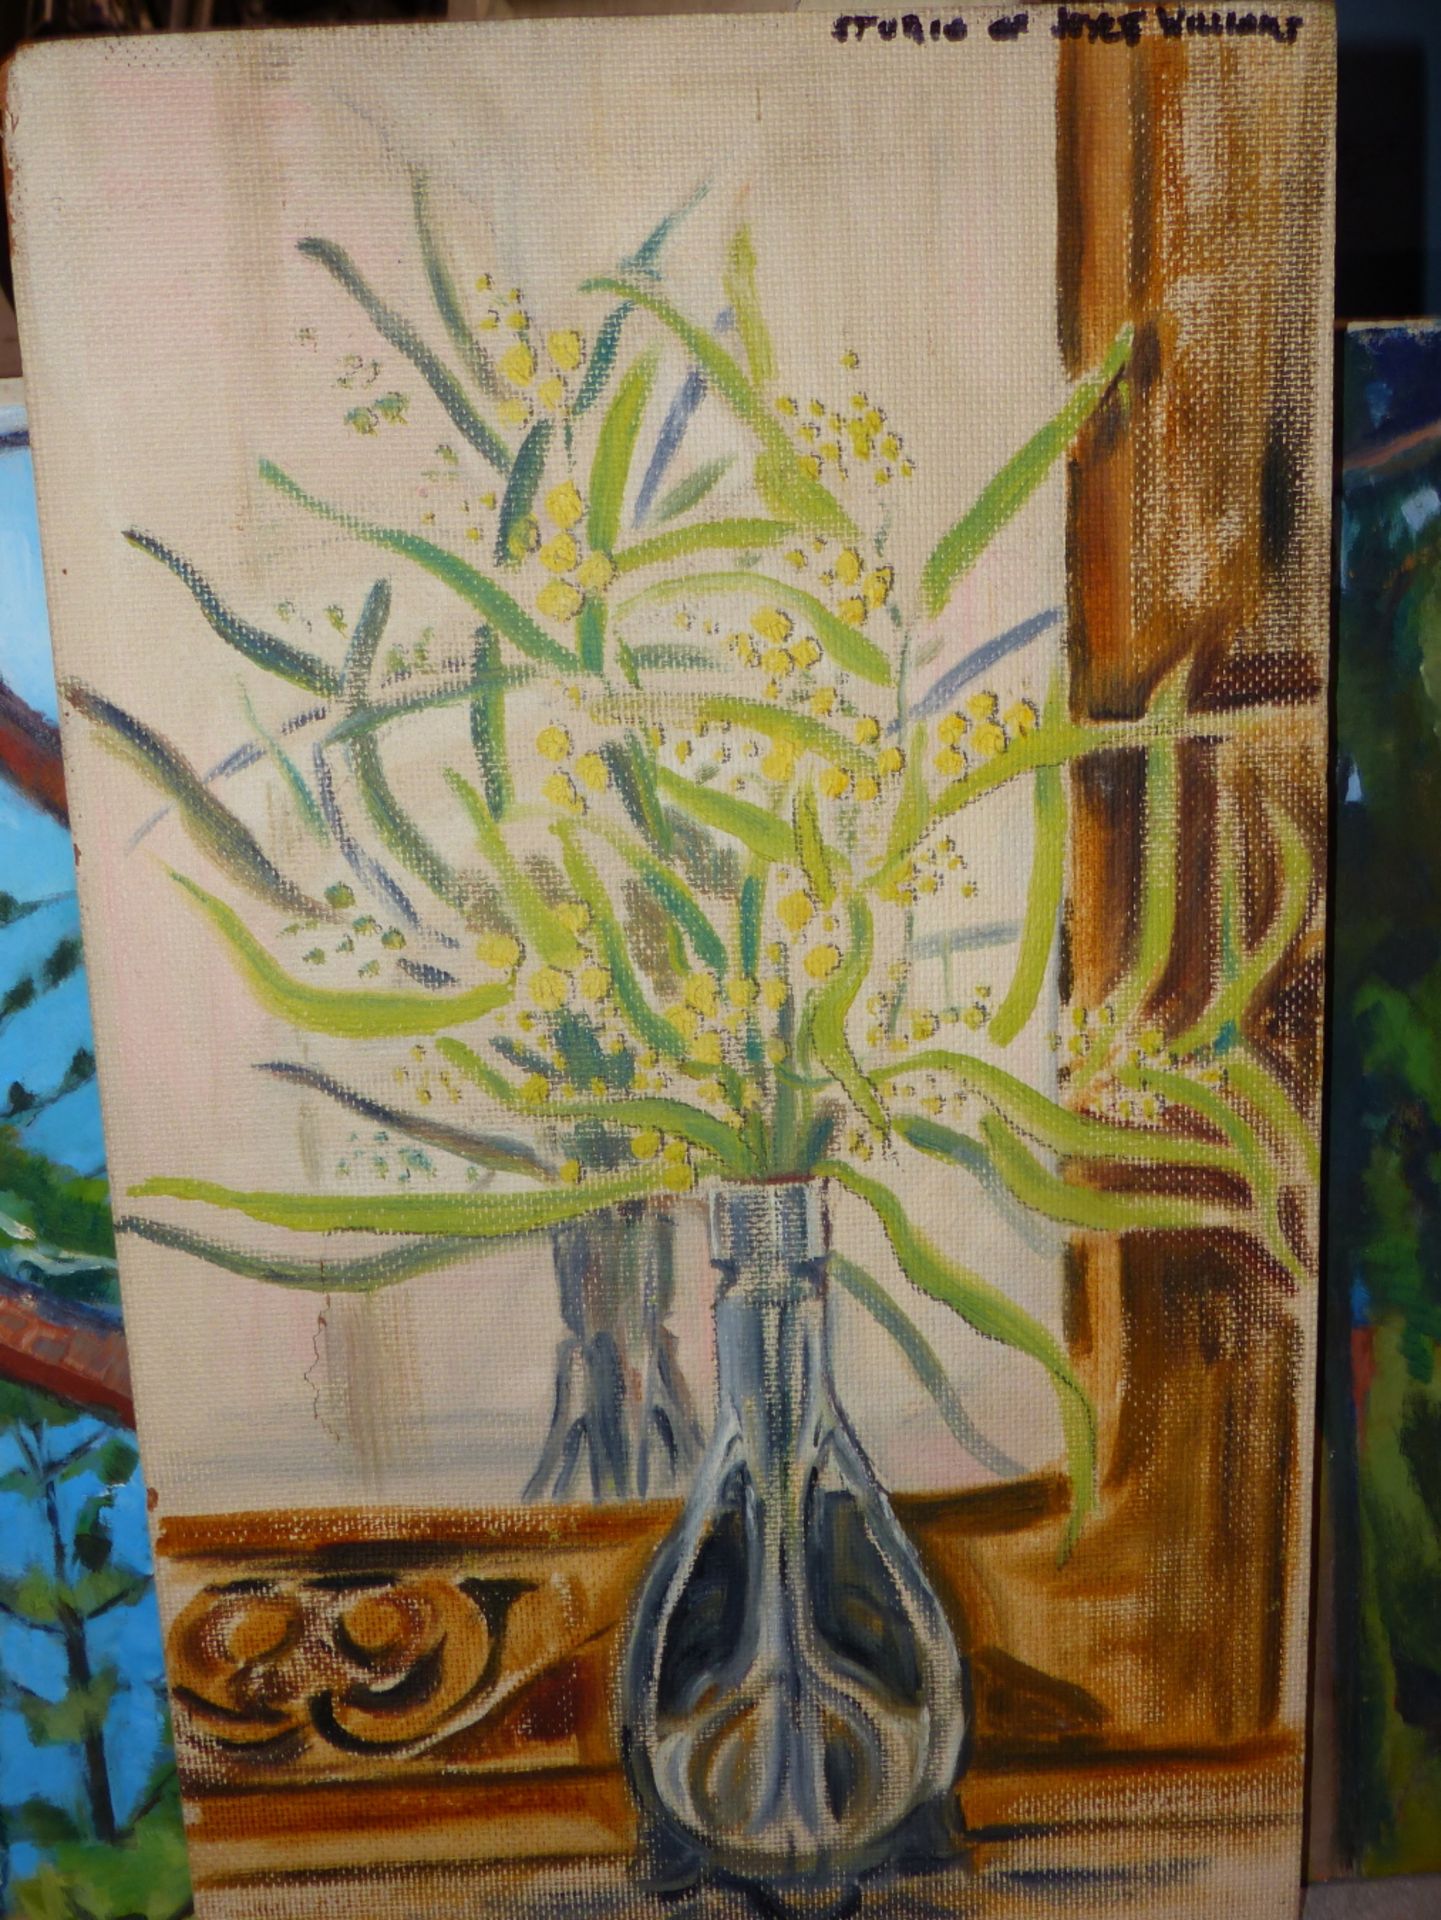 FIVE 20TH CENTURY UNFRAMED OILS ON BOARD OF LANDSCAPES AND GARDENS, ALL INSCRIBED "FROM THE STUDIO - Image 3 of 7